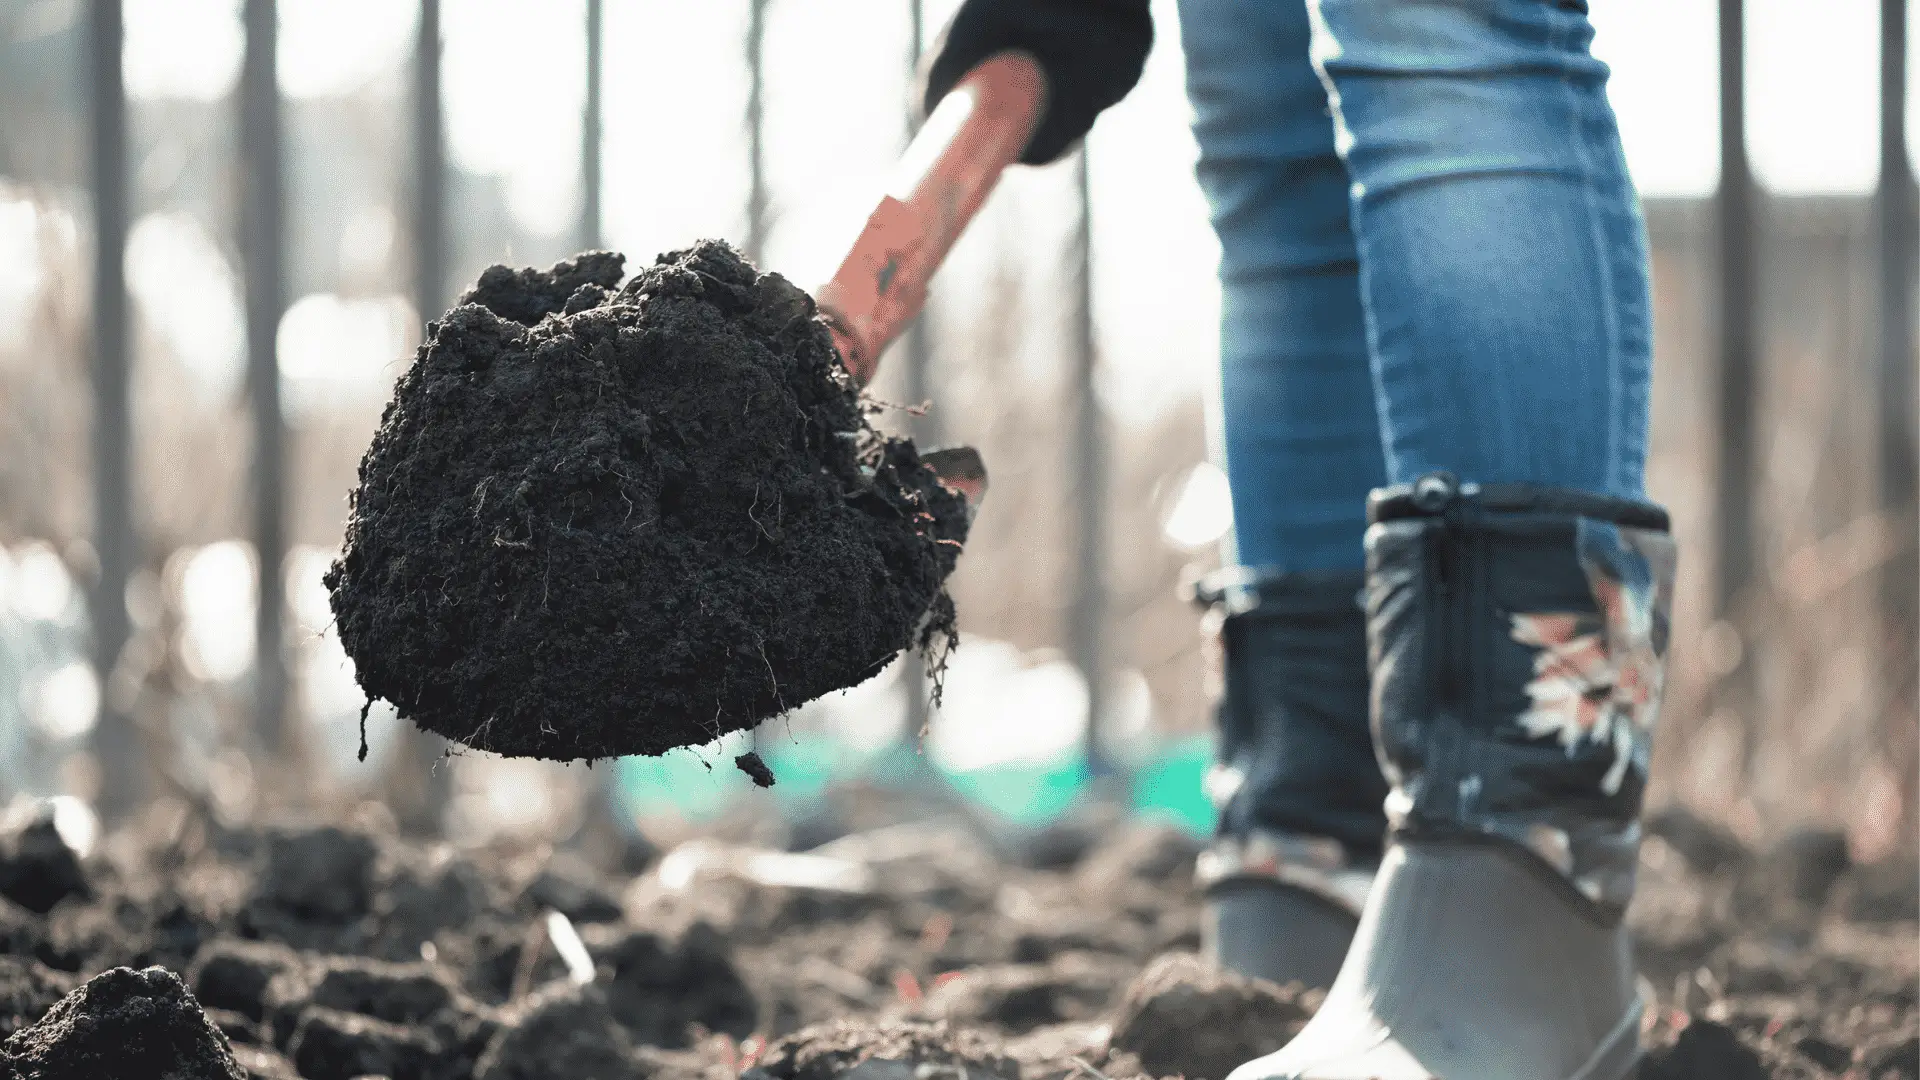 How to Make Gardening Soil A Step by Step Guide